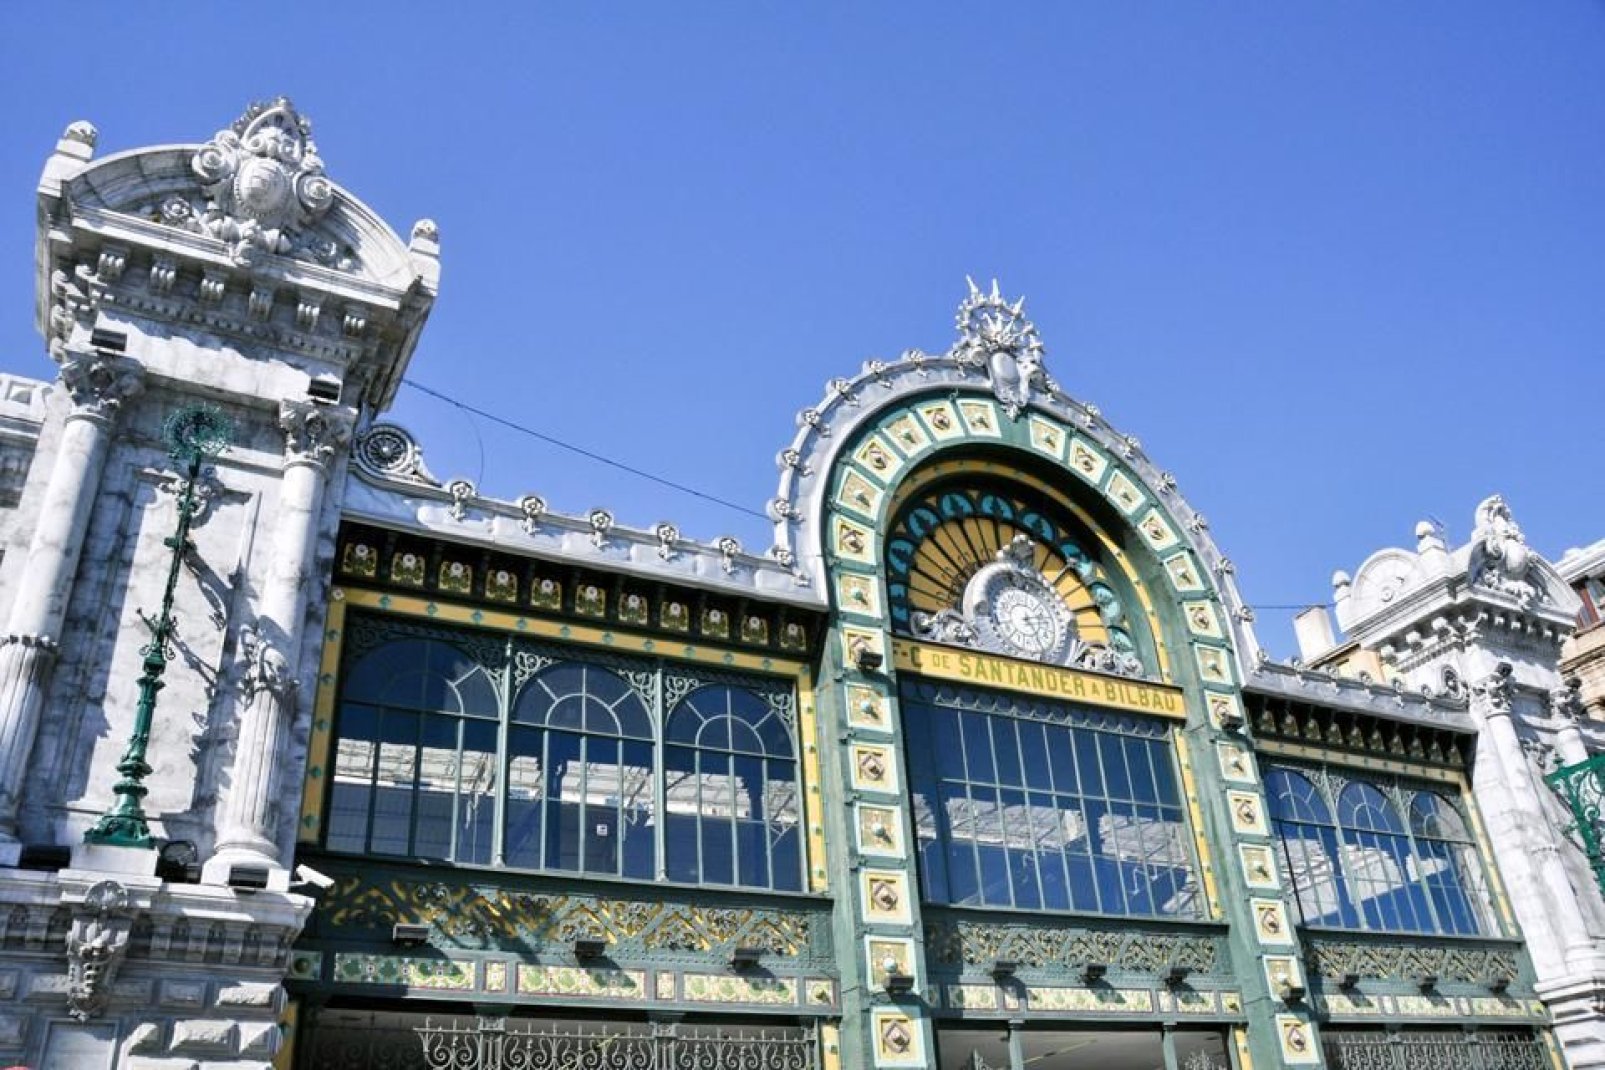 Built in 1902, the Concordia station is a unique example of the Art Nouveau style. It is part of Bilbao's Belle Époque heritage.